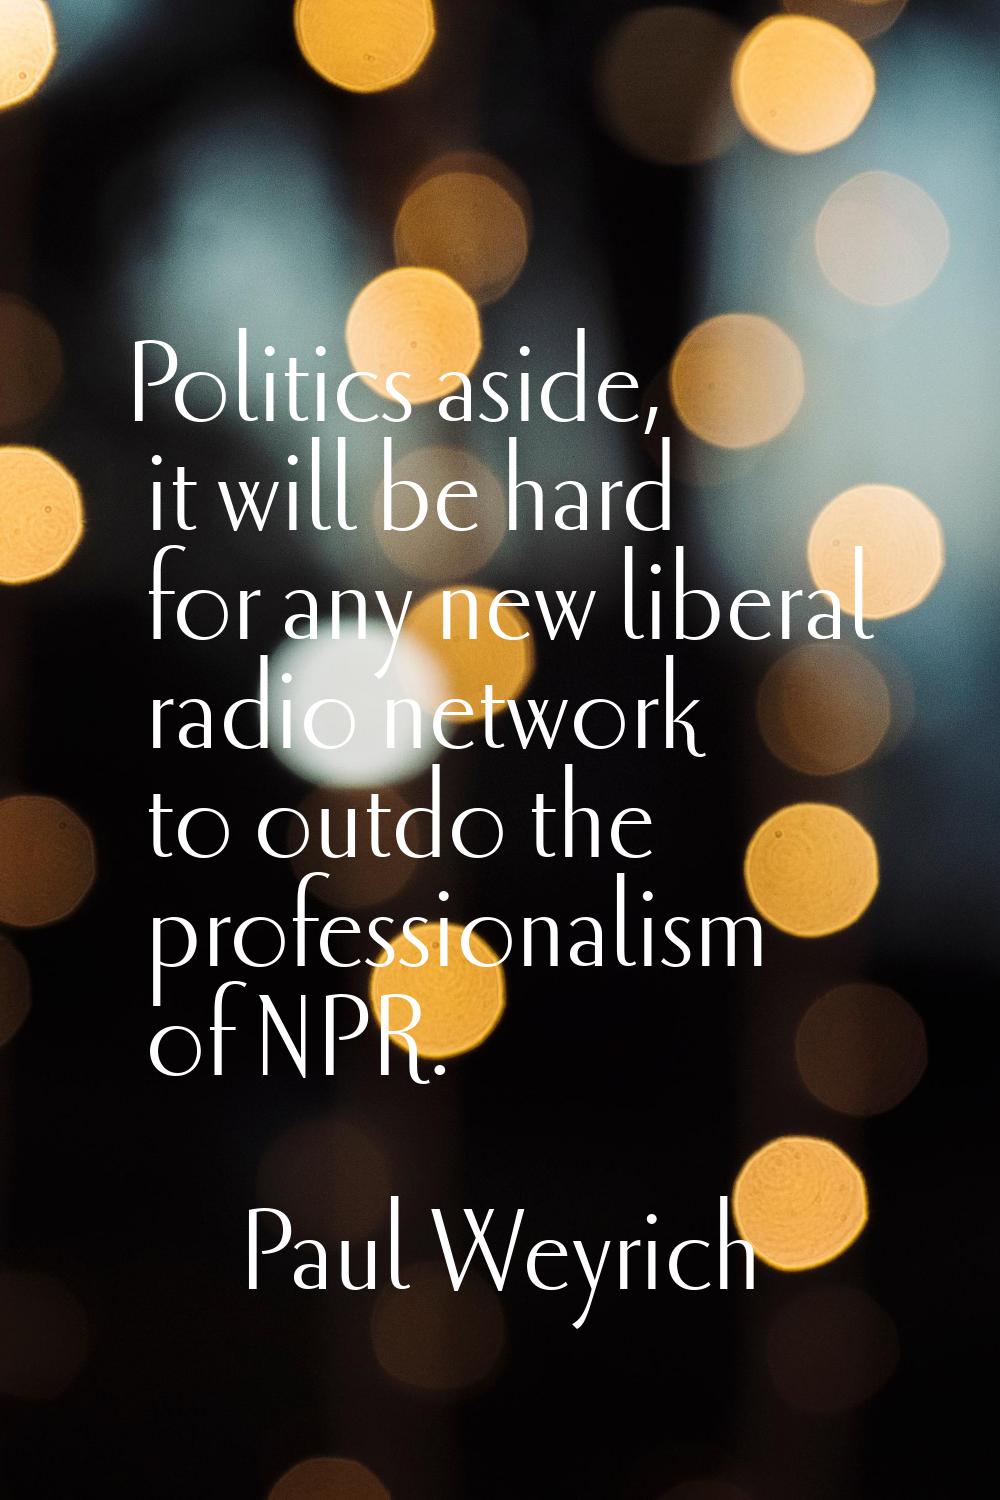 Politics aside, it will be hard for any new liberal radio network to outdo the professionalism of N